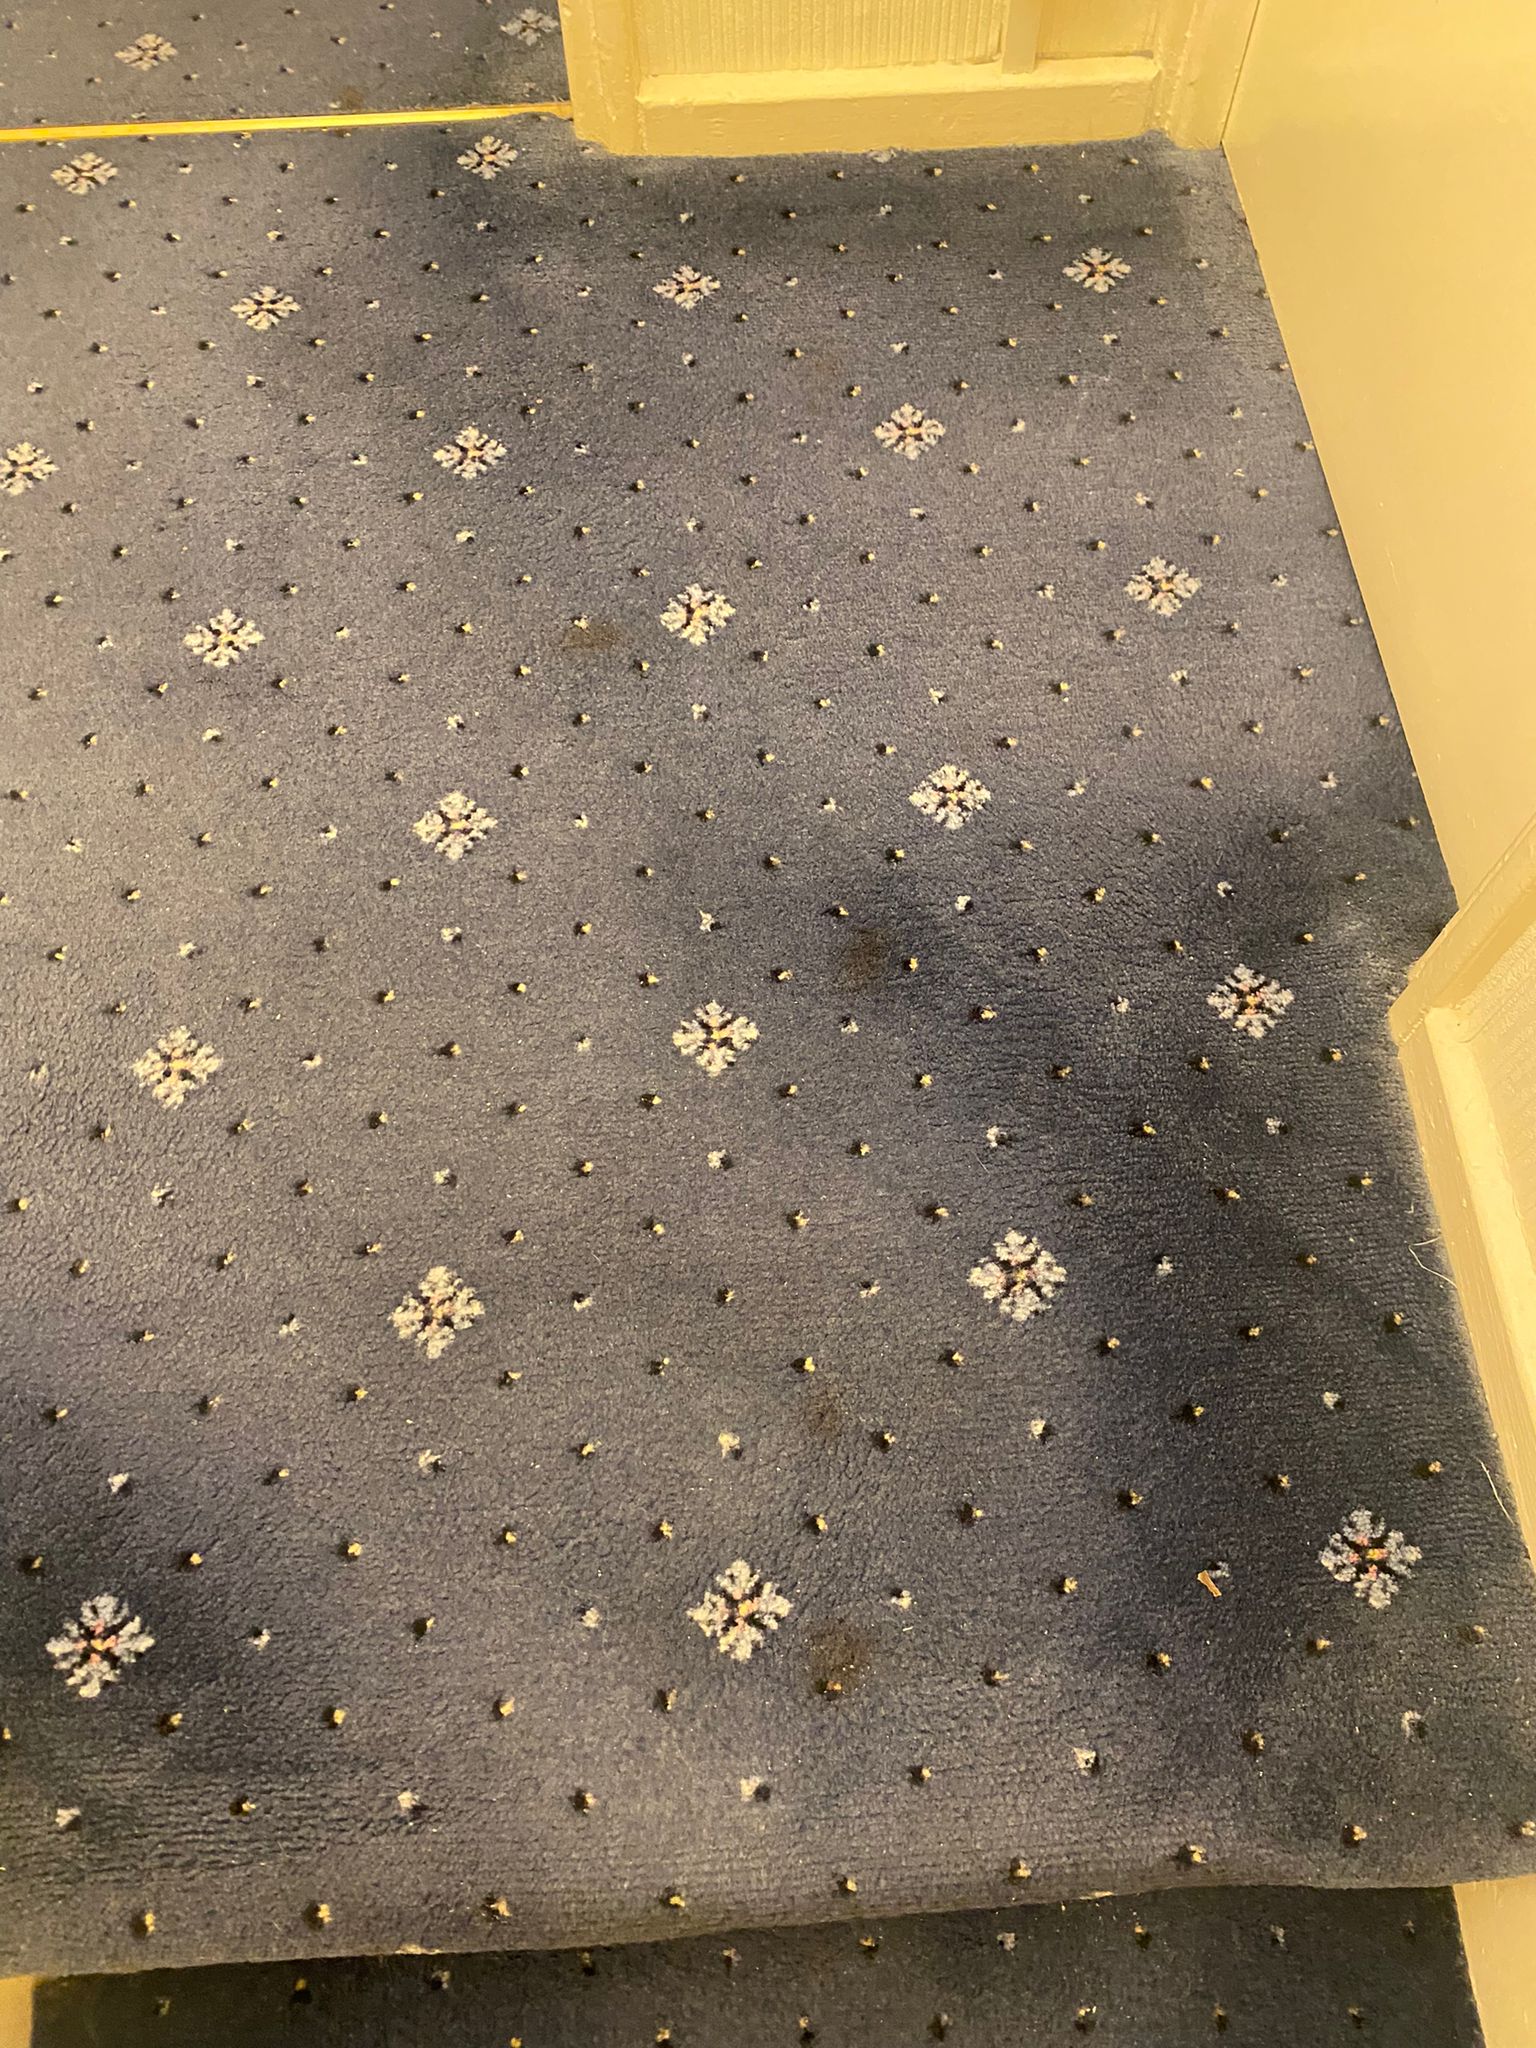 Stains on a carpet